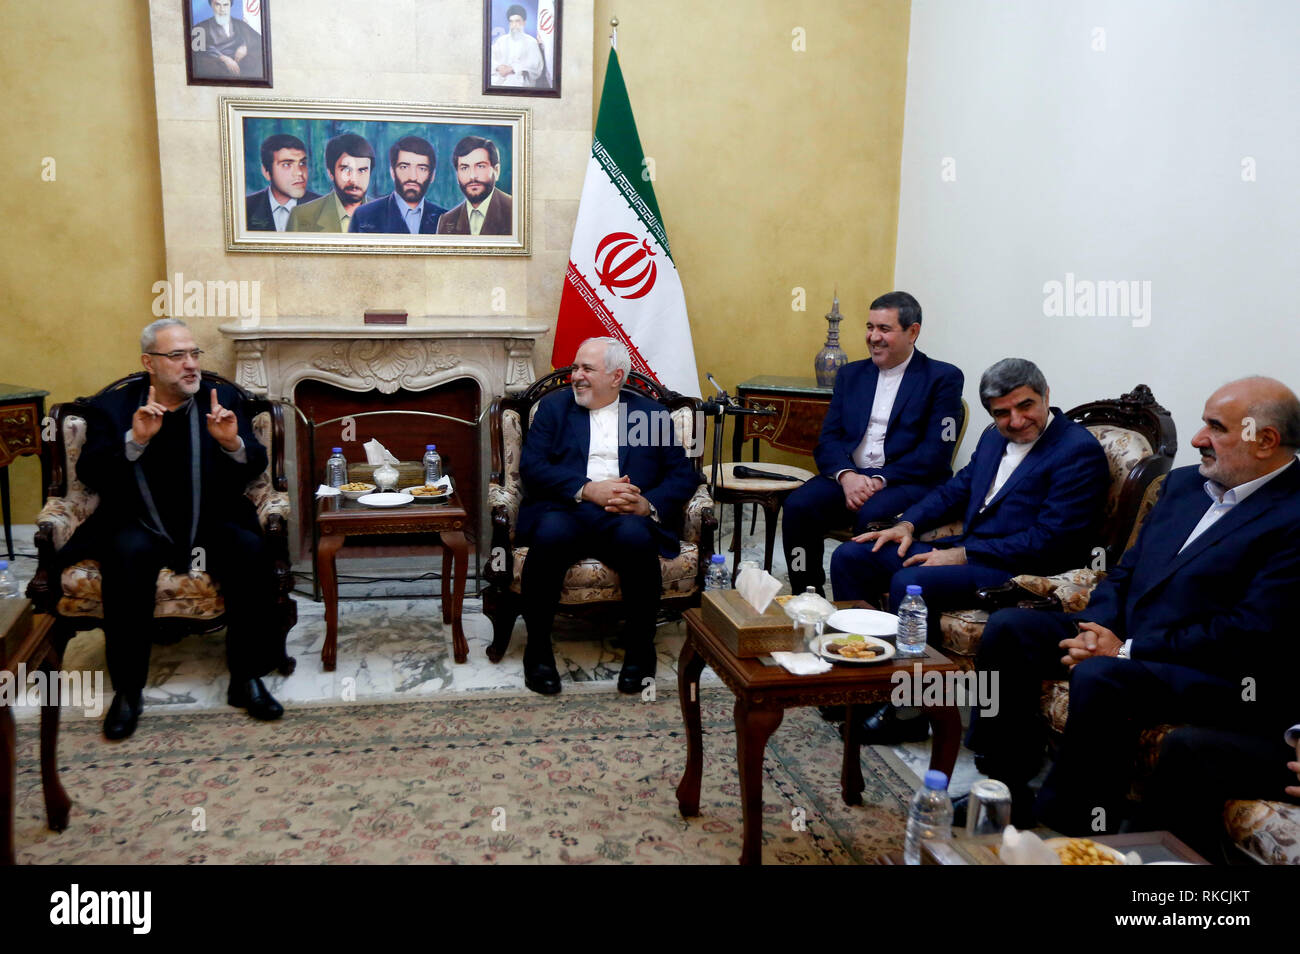 Beijing, Lebanon. 10th Feb, 2019. Iranian Foreign Minister Mohammad Javad Zarif (2nd L) meets with Lebanese officials in the Iranian Embassy in Beirut, Lebanon, Feb. 10, 2019. Zarif arrived in Lebanon on Sunday for a two-day official visit to meet with Lebanese officials and informed them about Iran's readiness to help Lebanon on all levels. Credit: Bilal Jawich/Xinhua/Alamy Live News Stock Photo